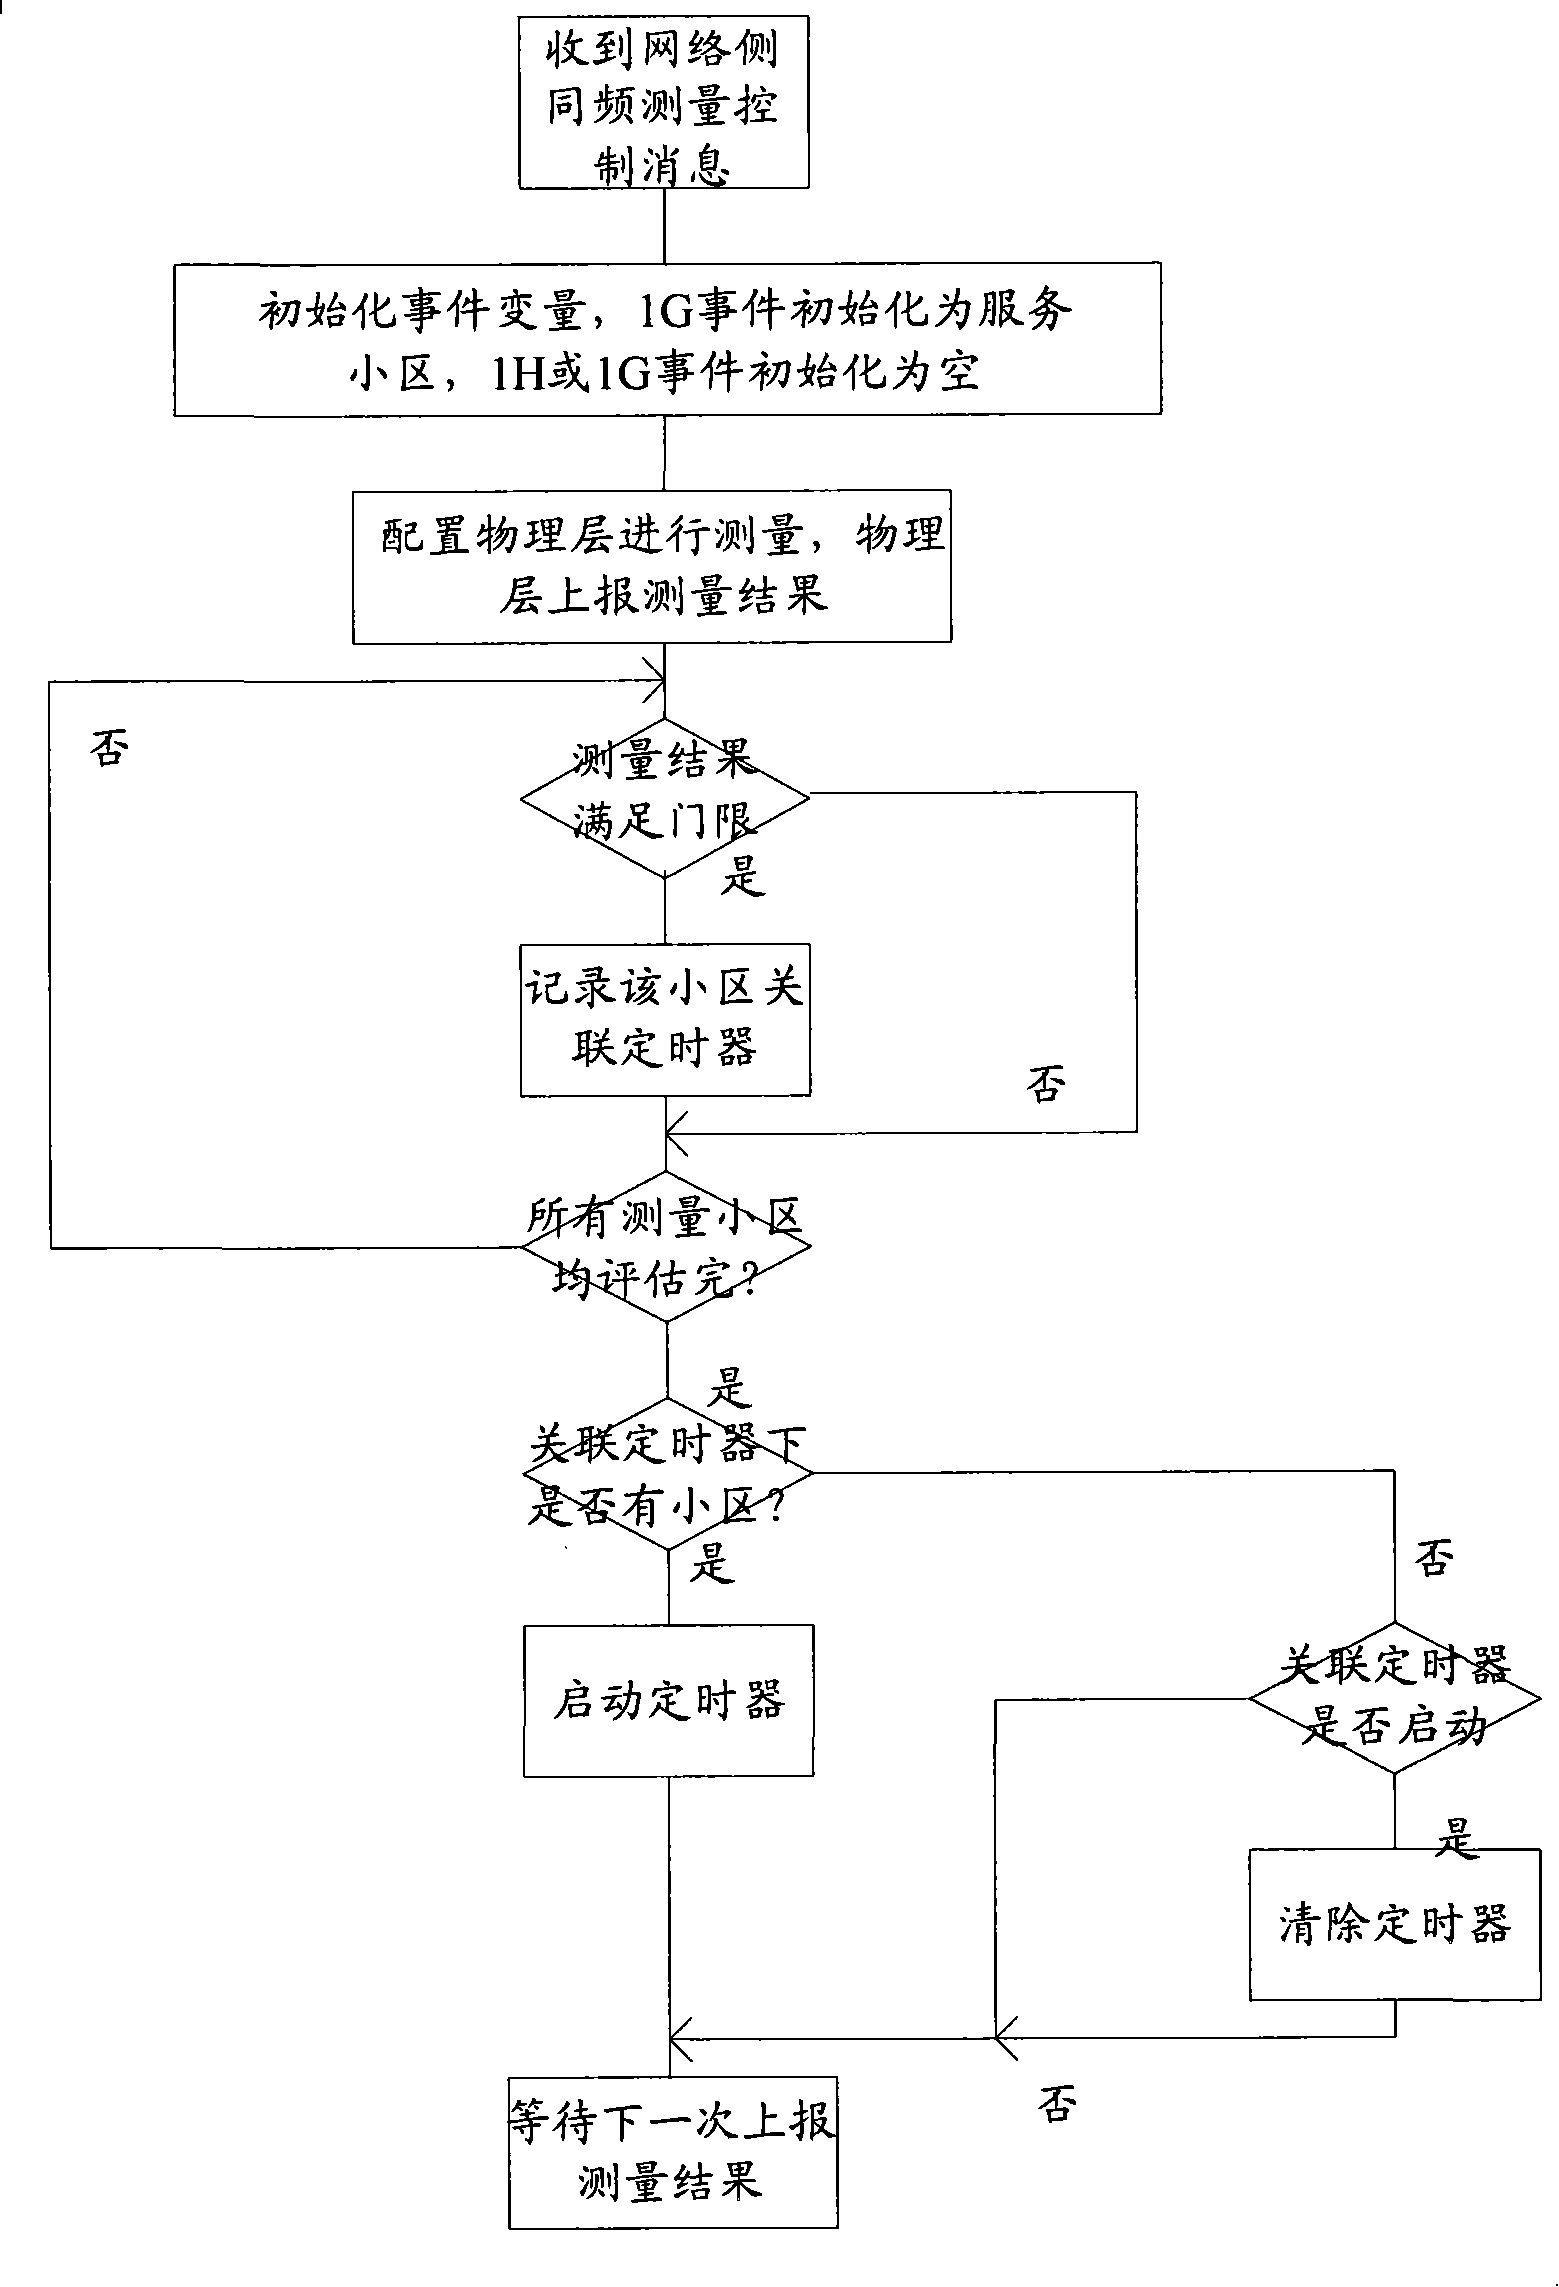 Same frequency measuring case evaluating method